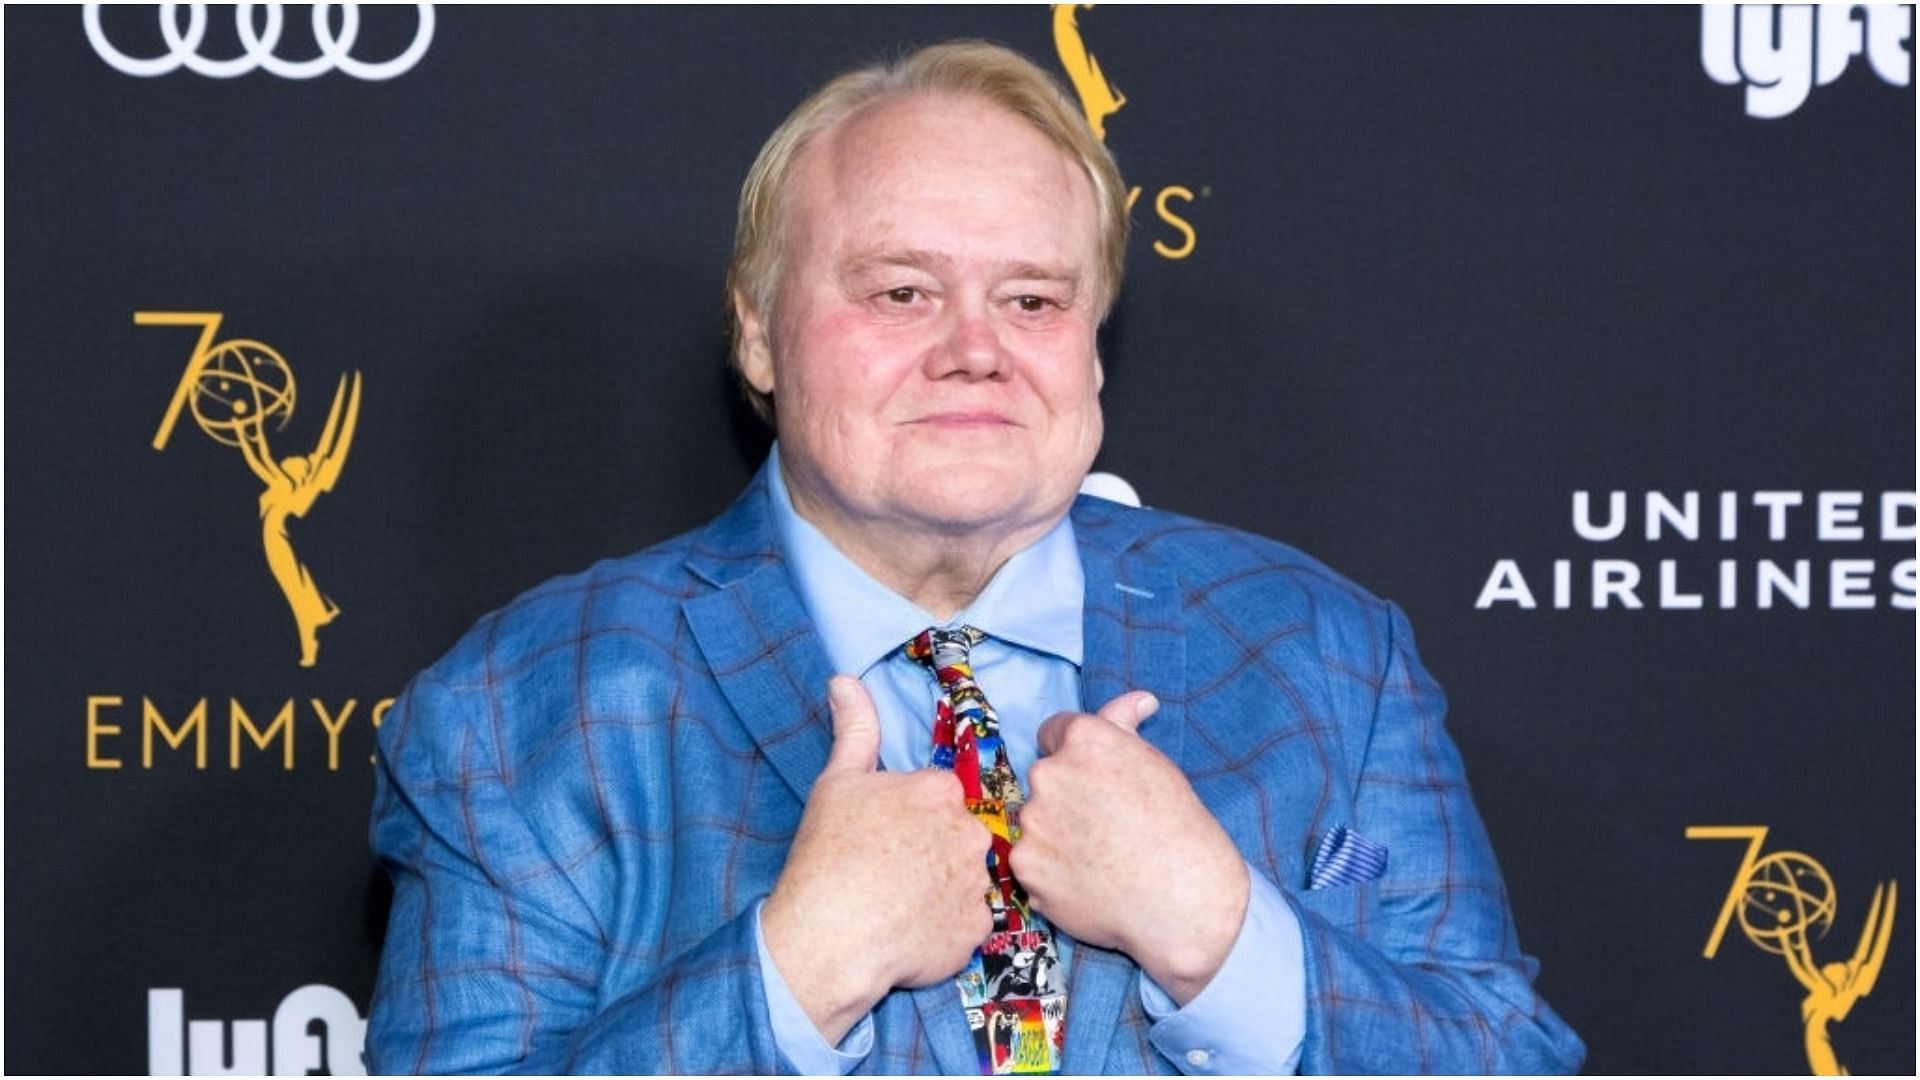 Louie Anderson had quite the career (Image via Greg Doherty/Getty Images)